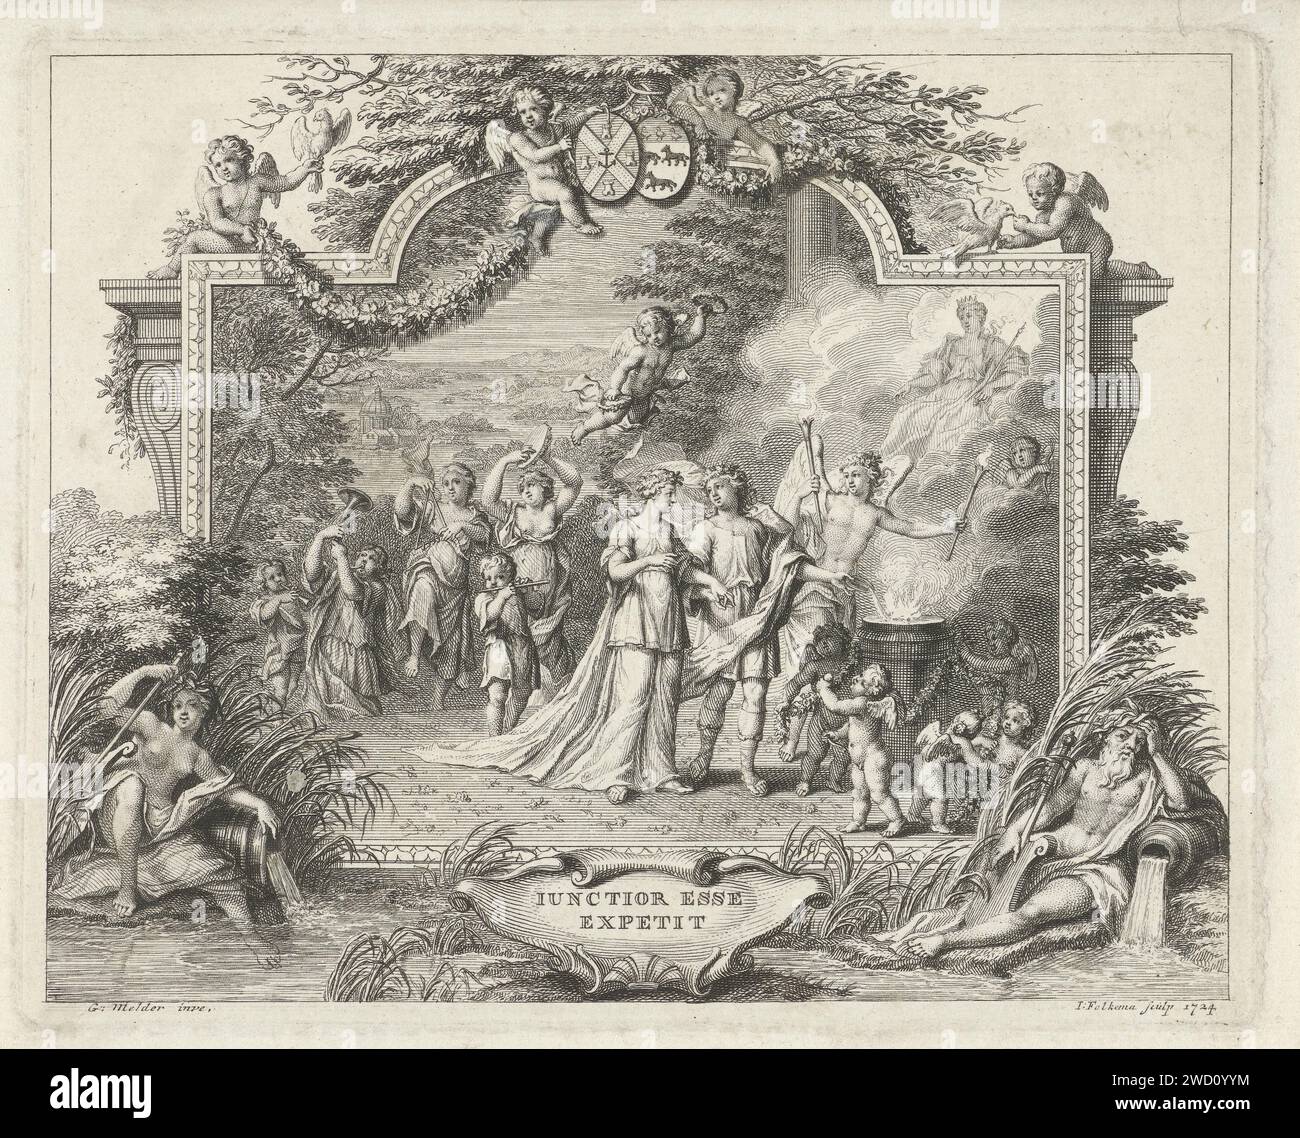 Allegory at the marriage, Jacob Folkema, After Gerard Melder, 1724 print Allegory on the marriage, placed in an elegant list where the weapons of the Neufville and De Wolff families adorn. Central is a couple who are led to the sacrificial column by an angel with fire ventures. Putti are waiting for them with flower wreaths. In the sky, Juno looks from a cloud. In the background, figures make music and a putto with two laurel wreaths. Outside the list flanked by two river gods, the text is on a cartouche: Iunctior Esse Expetit.  paper etching 'Castit marriage', 'Marital faith', 'Marriage' (Rip Stock Photo